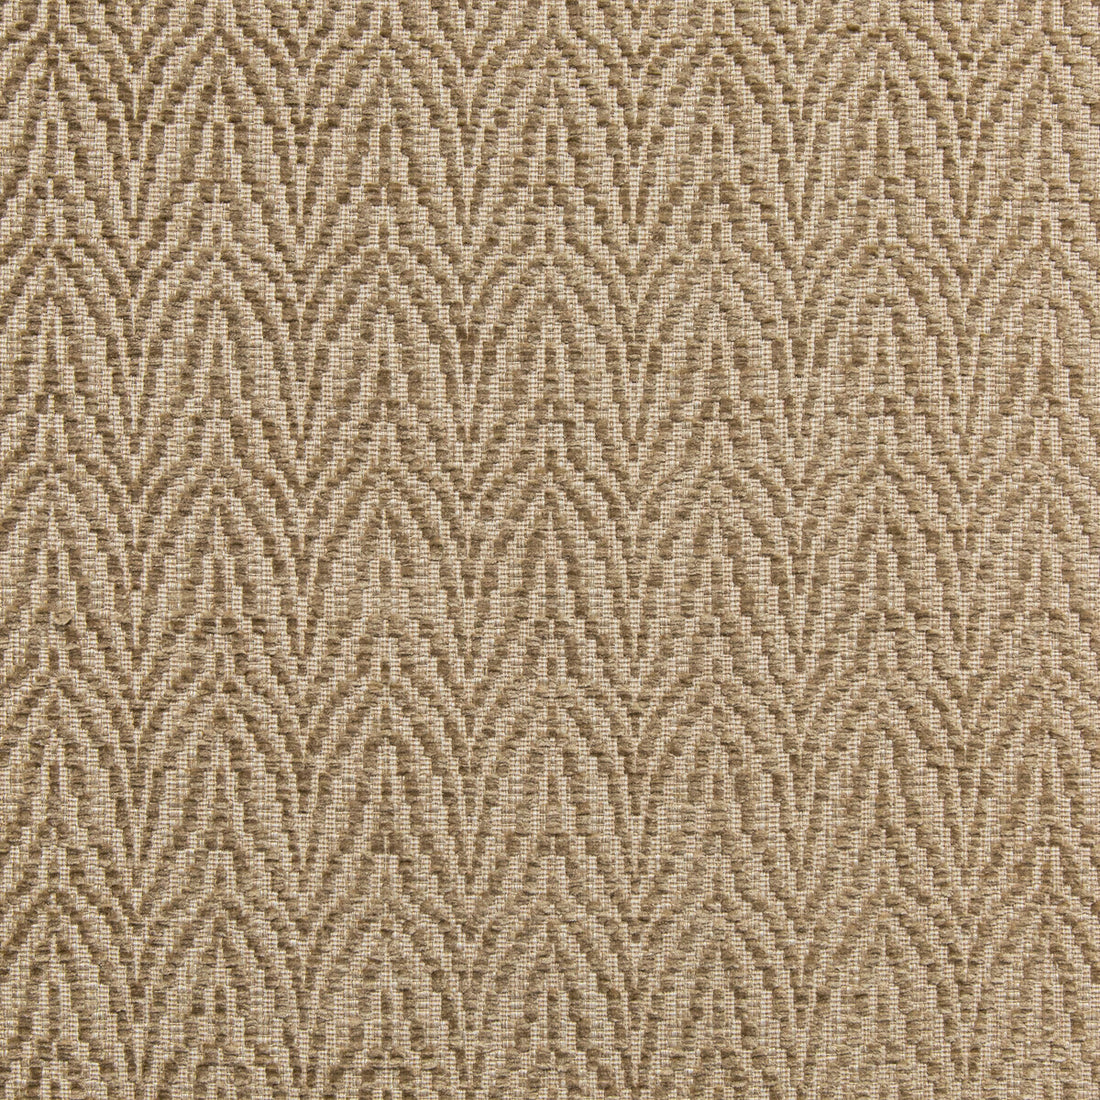 Blyth Weave fabric in straw color - pattern 2020108.164.0 - by Lee Jofa in the Linford Weaves collection